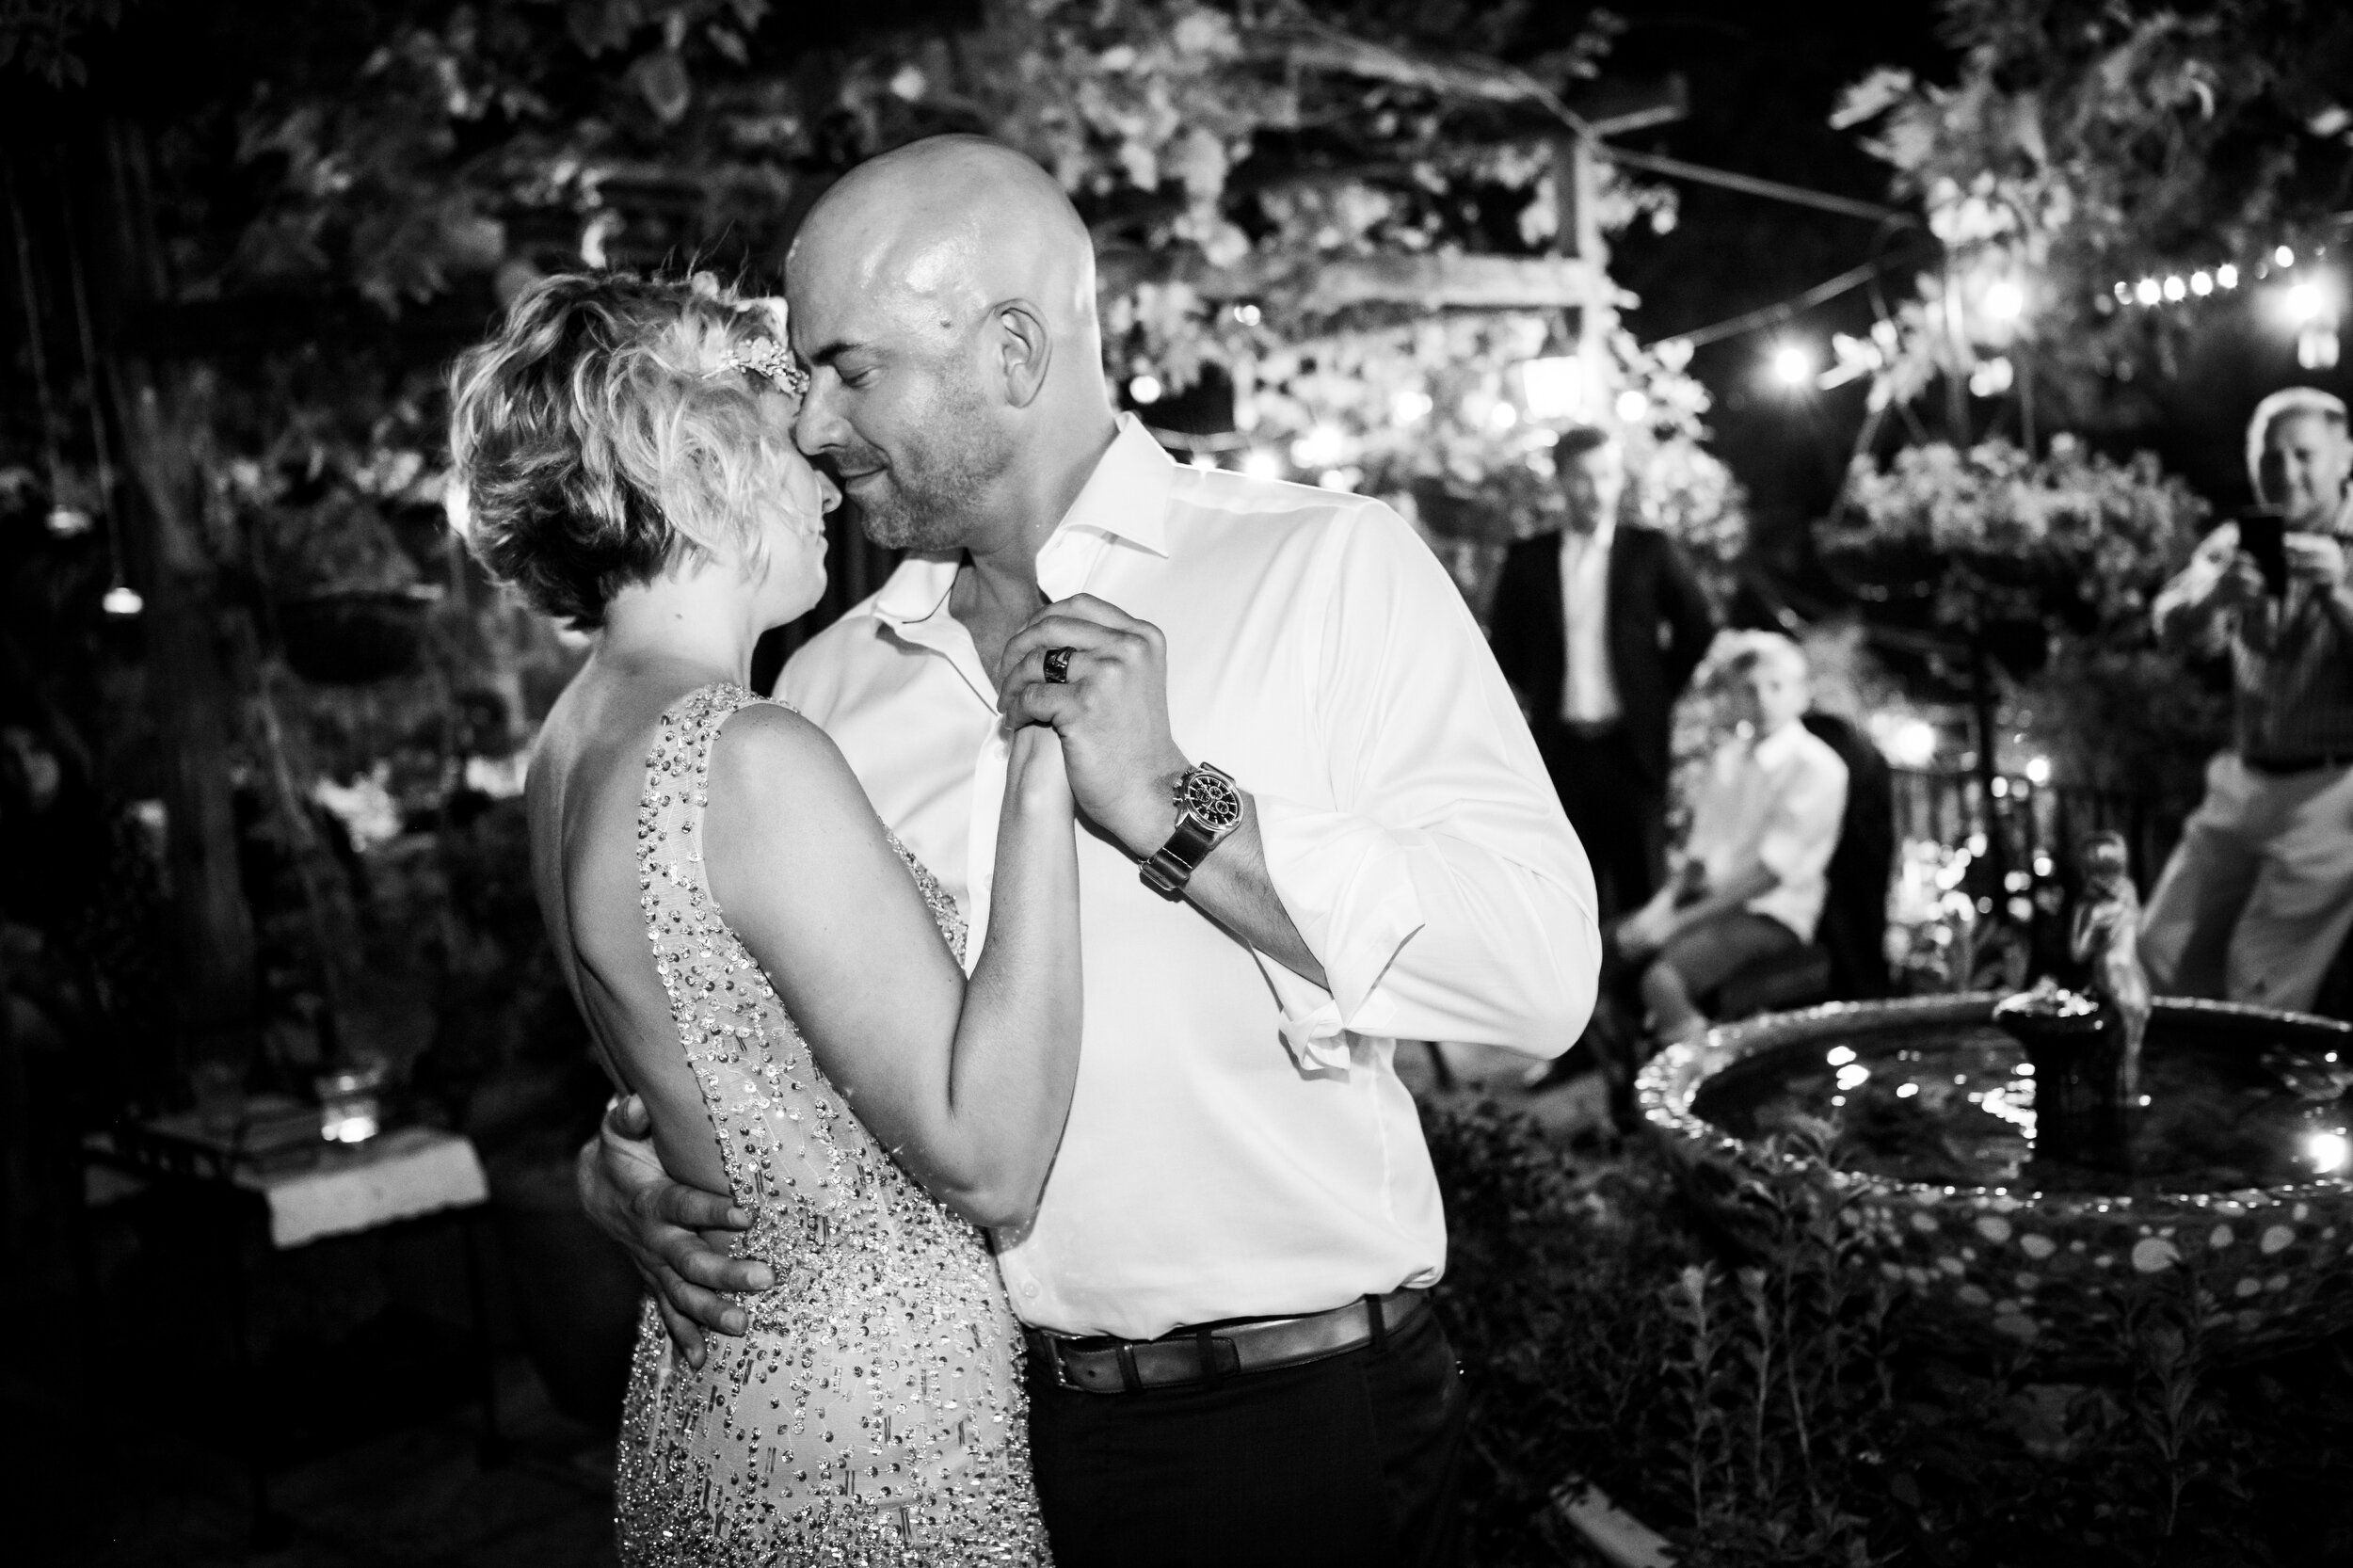 Bride and groom dance together during their reception:  destination wedding photo at the Lost Unicorn Hotel, Tsagarada, Greece by J. Brown Photography.